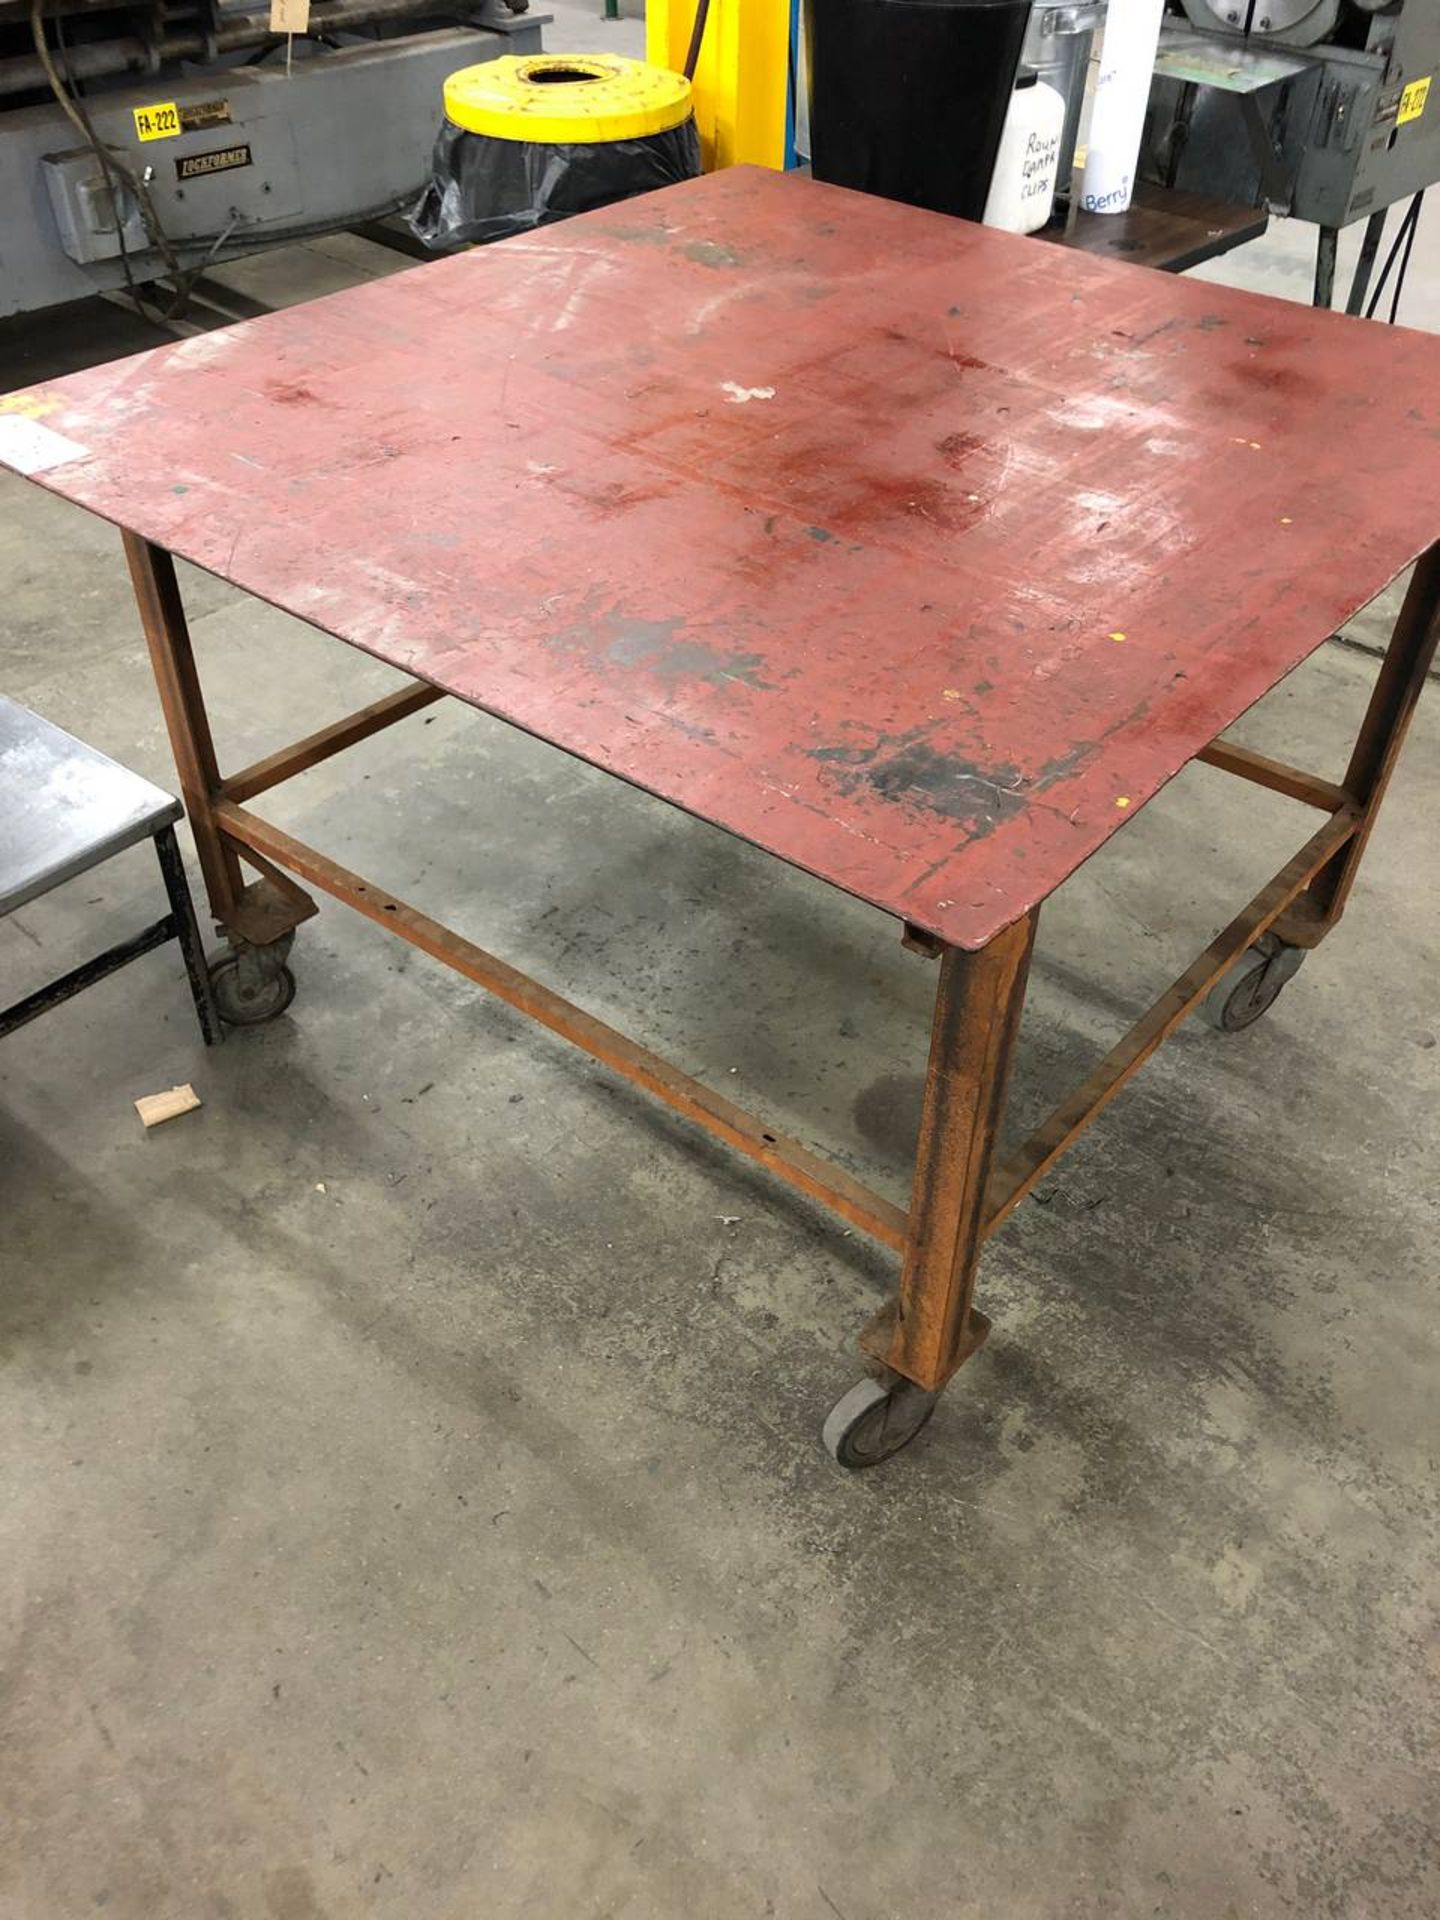 Rolling Table 4' x 4'